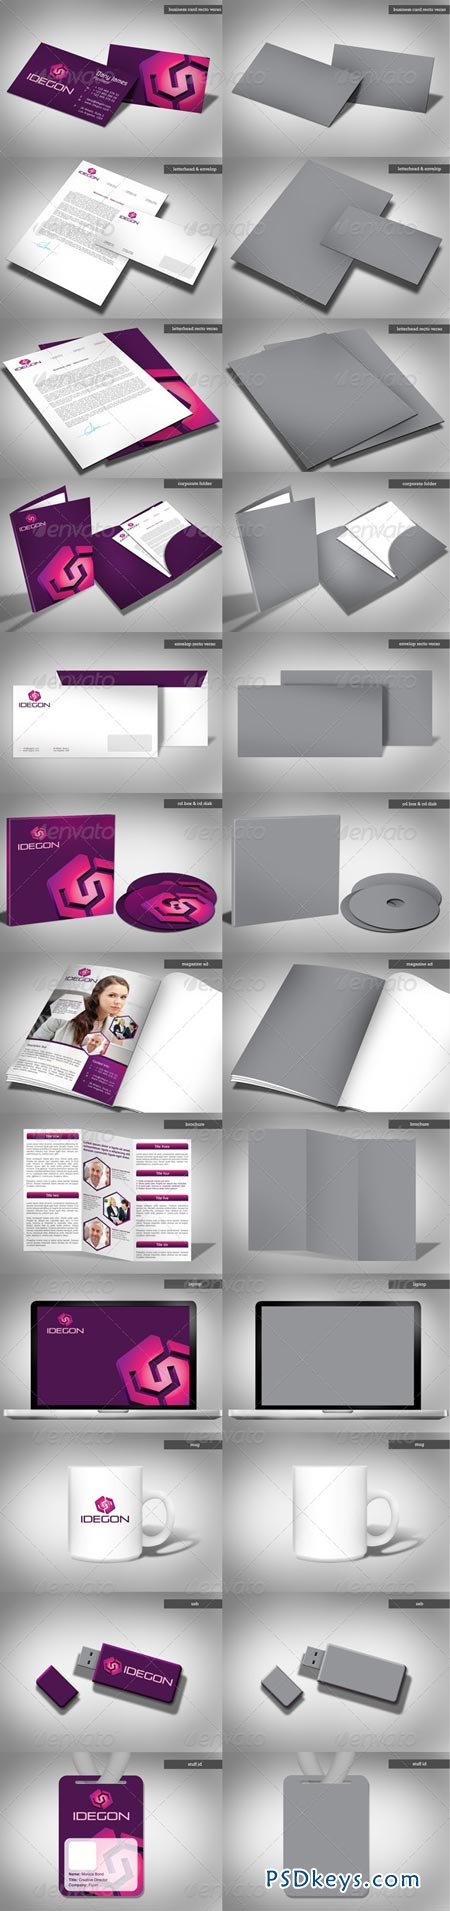 Full Corporate Identity Mockup Package 2878477